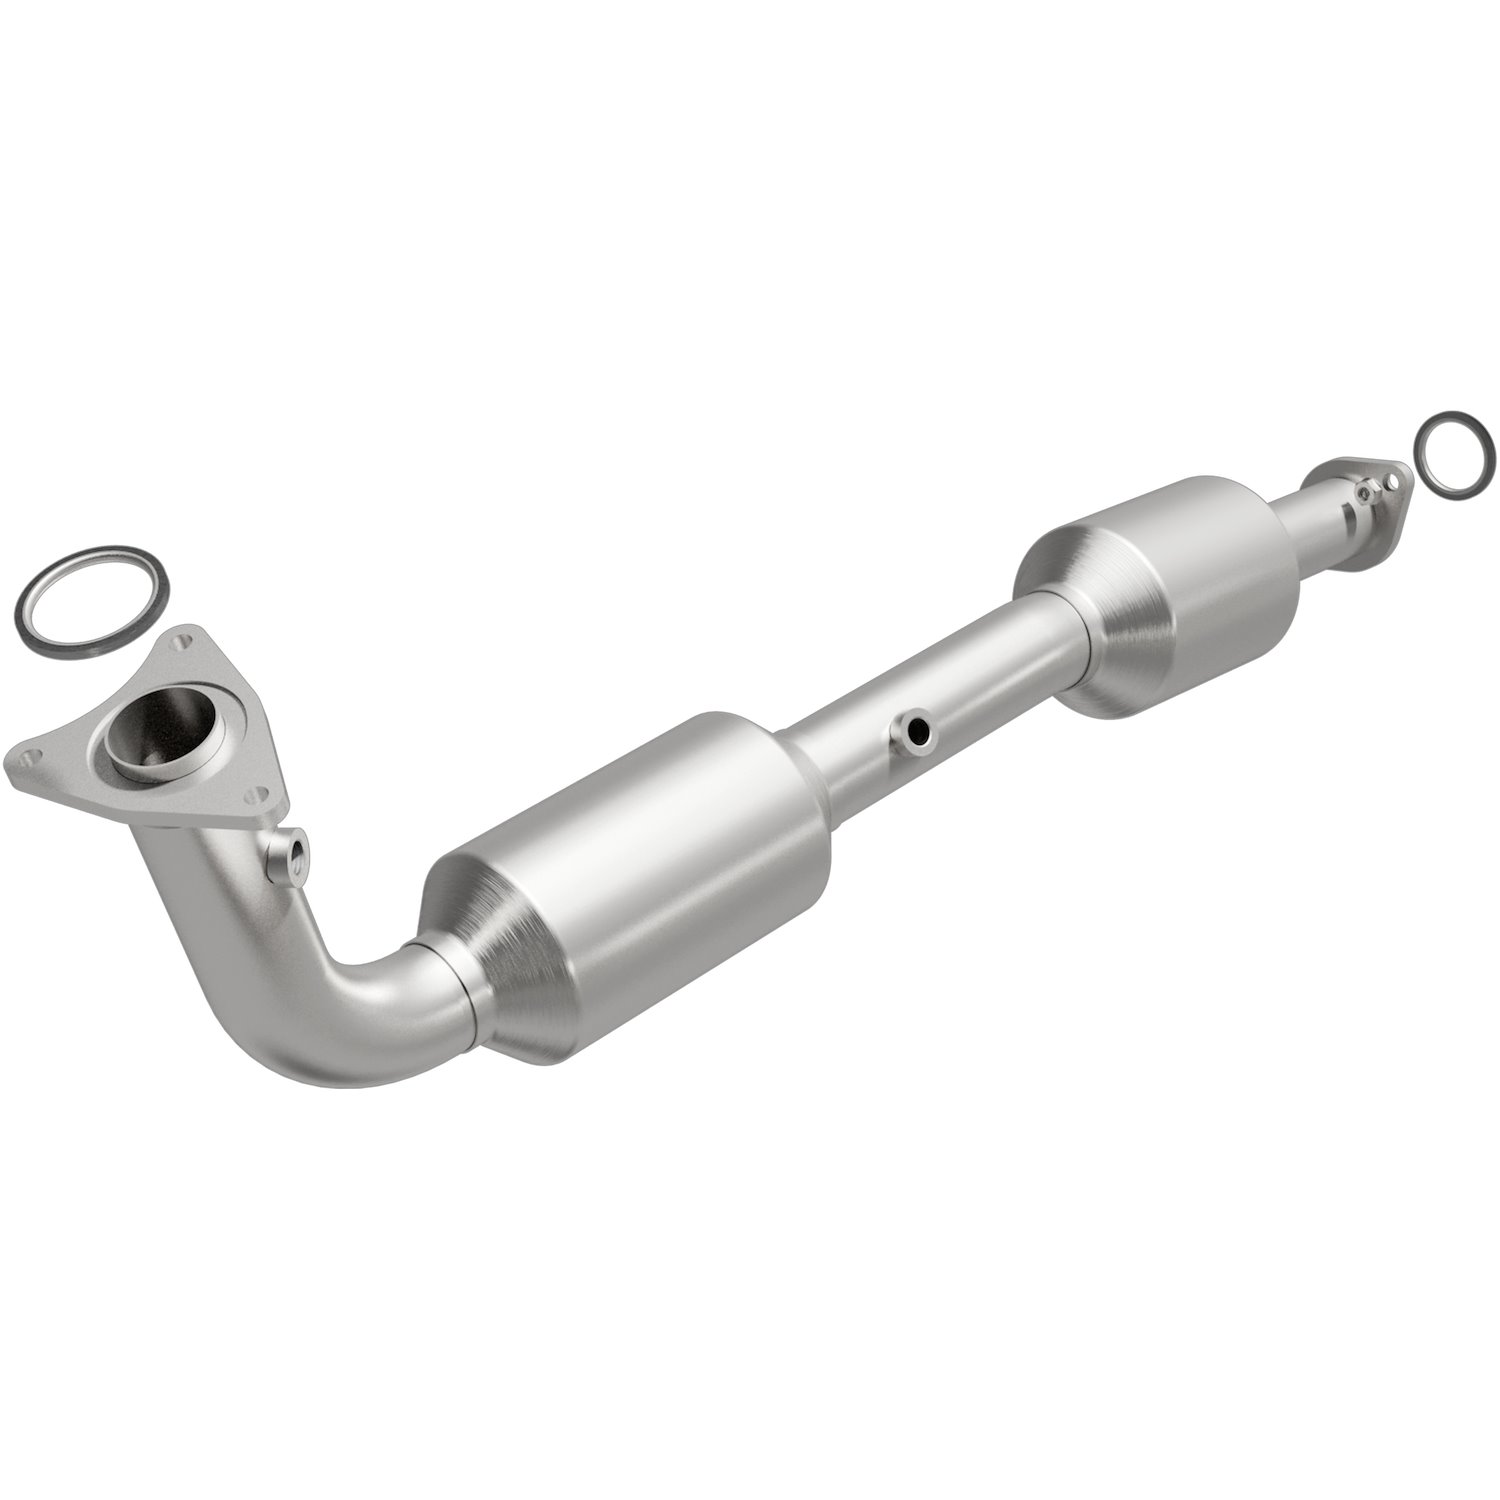 2007-2013 Toyota Tundra California Grade CARB Compliant Direct-Fit Catalytic Converter